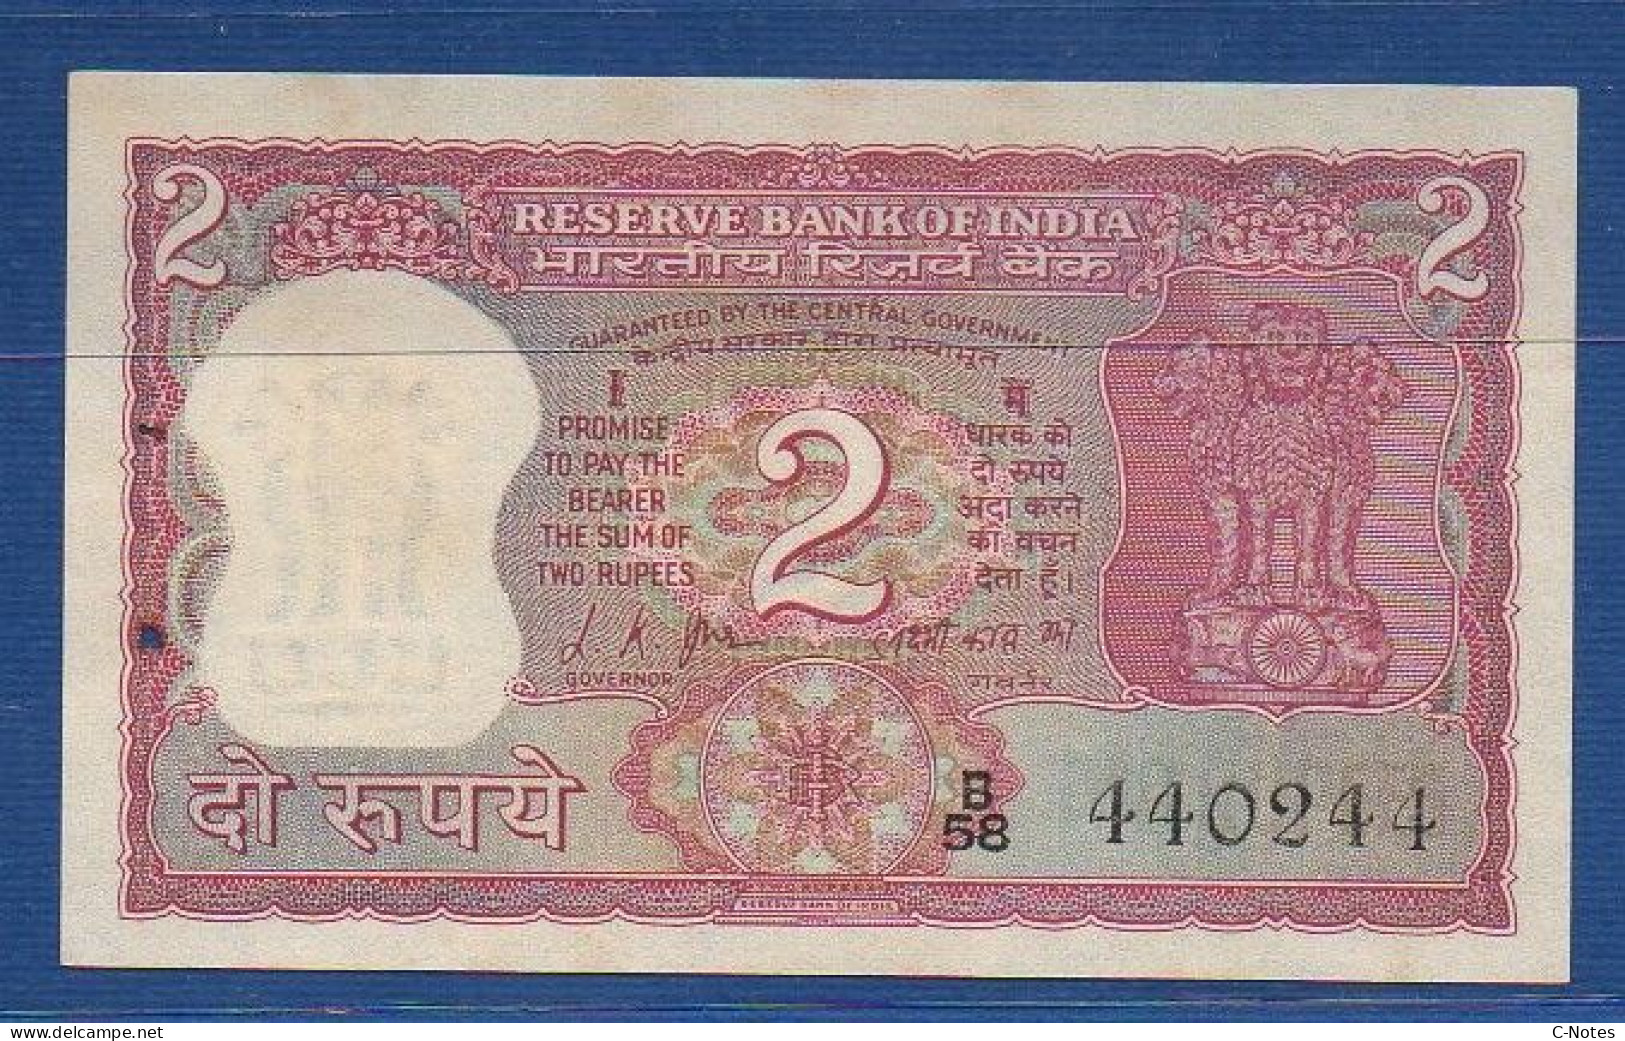 INDIA - P. 67a – 2 Rupees ND (1969-1970), UNC-,  Serie B58 440244 - Signature: L. K. Jha-  Centennial Of Birth Of Gandhi - Inde